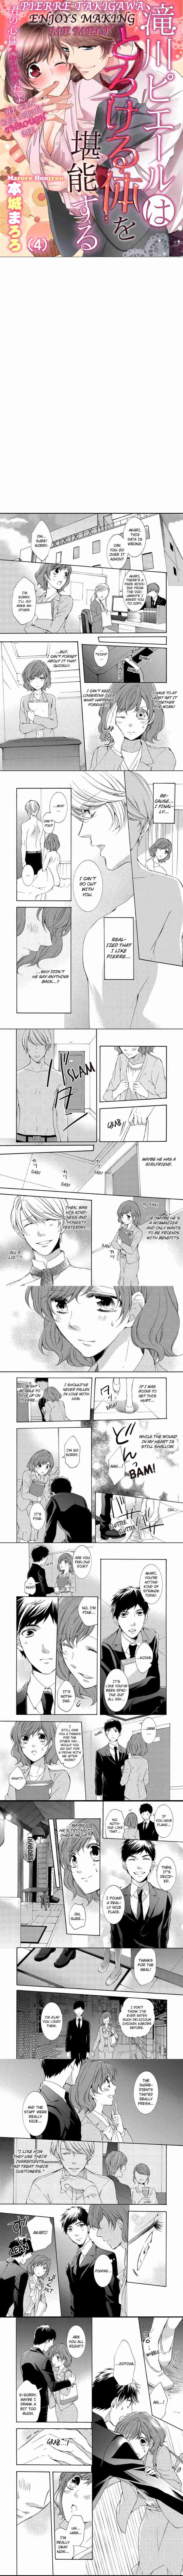 Pierre Takigawa Enjoys Making Me Melt / He can see right through me - Vol.1 Ch.4